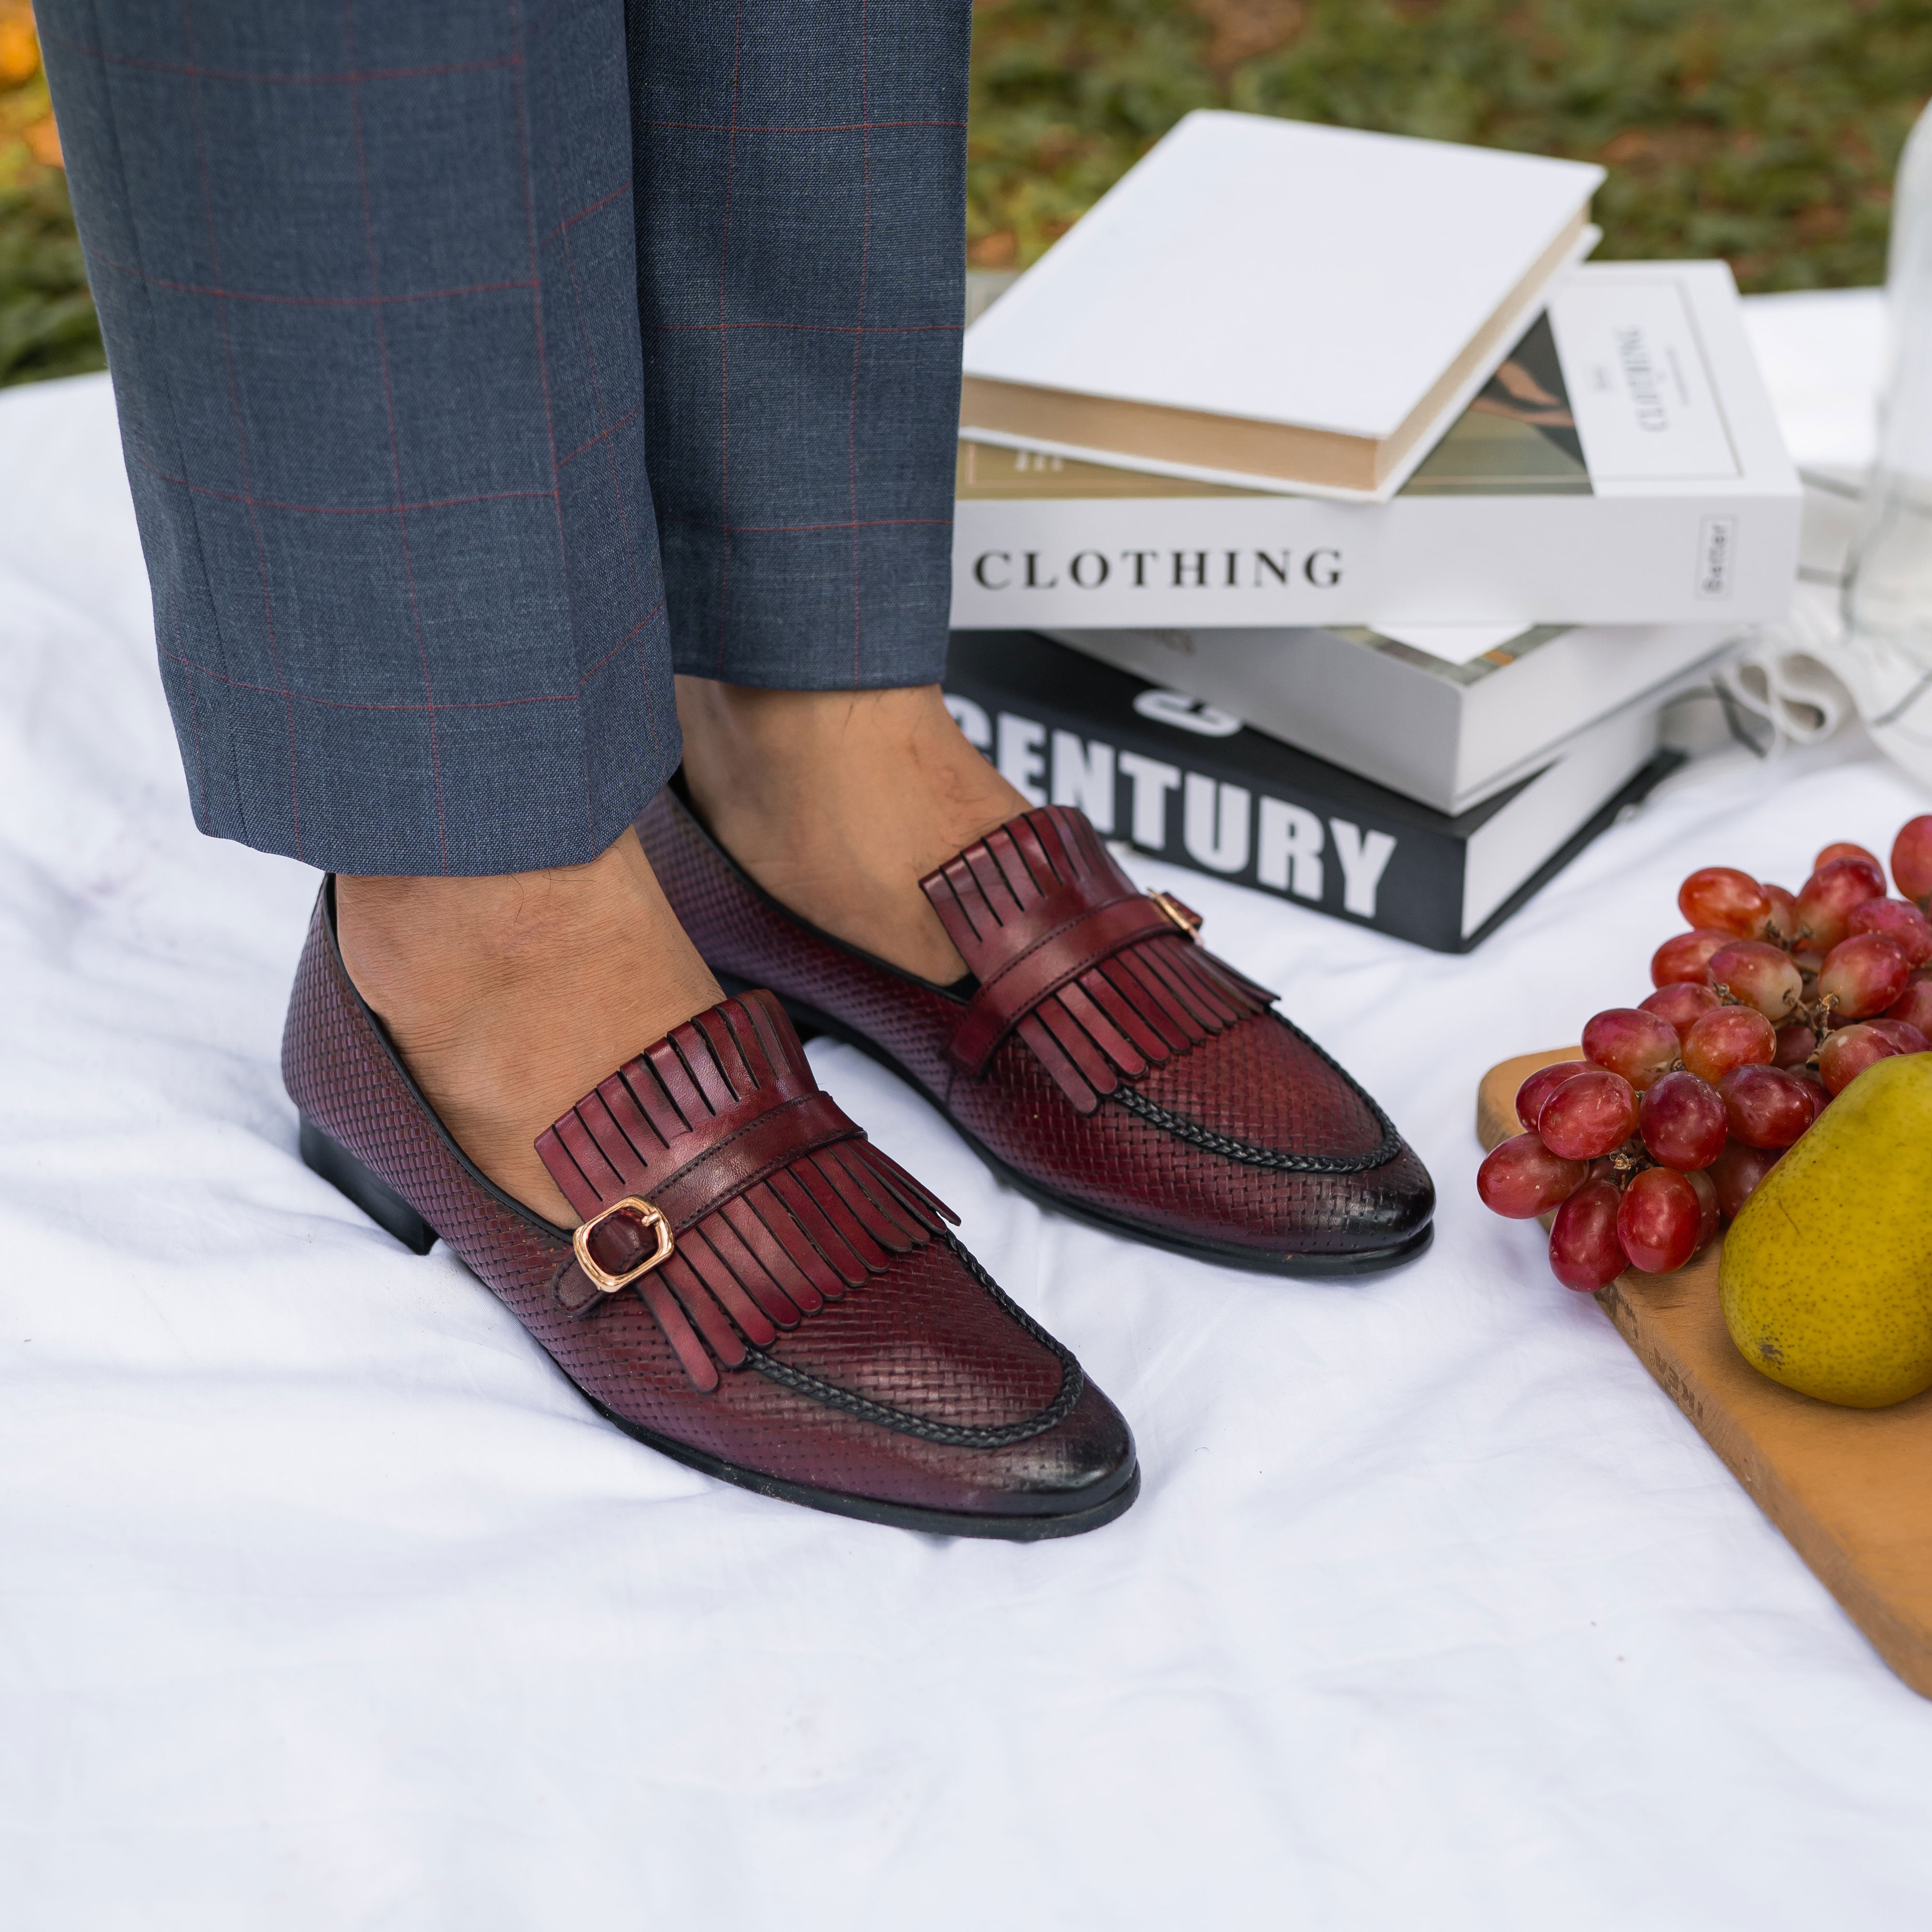 Fringe Kiltie Loafer - Red Burgundy Woven Leather with Side Buckle (Hand Painted Patina) - Zeve Shoes